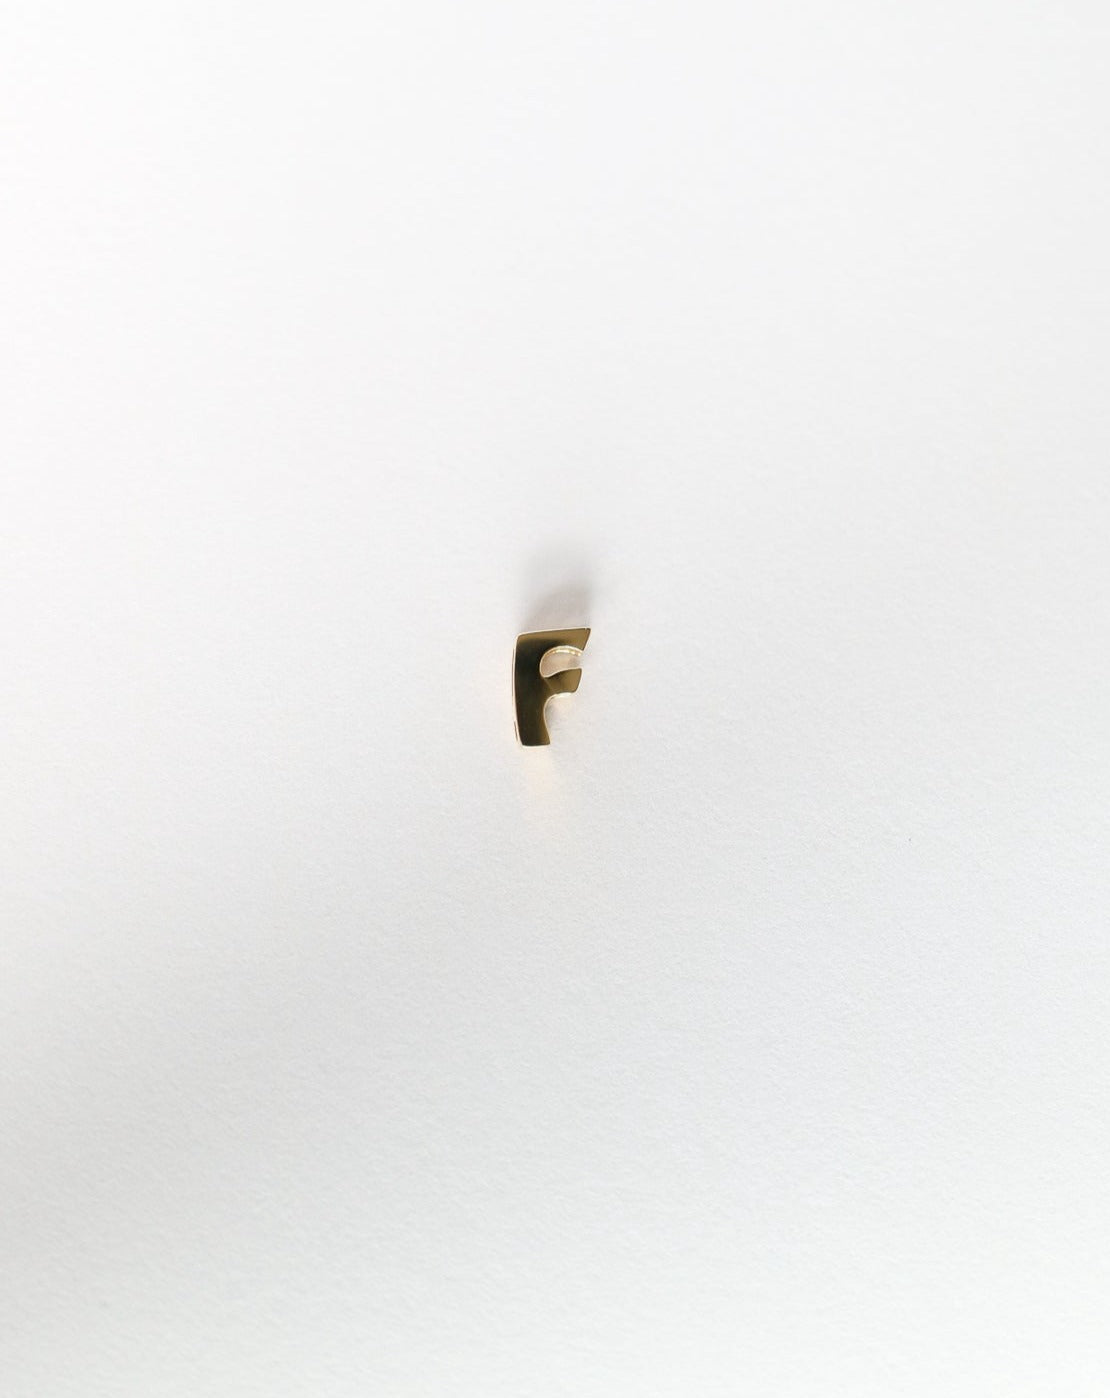 F initial charm letter pendant in 14kt gold